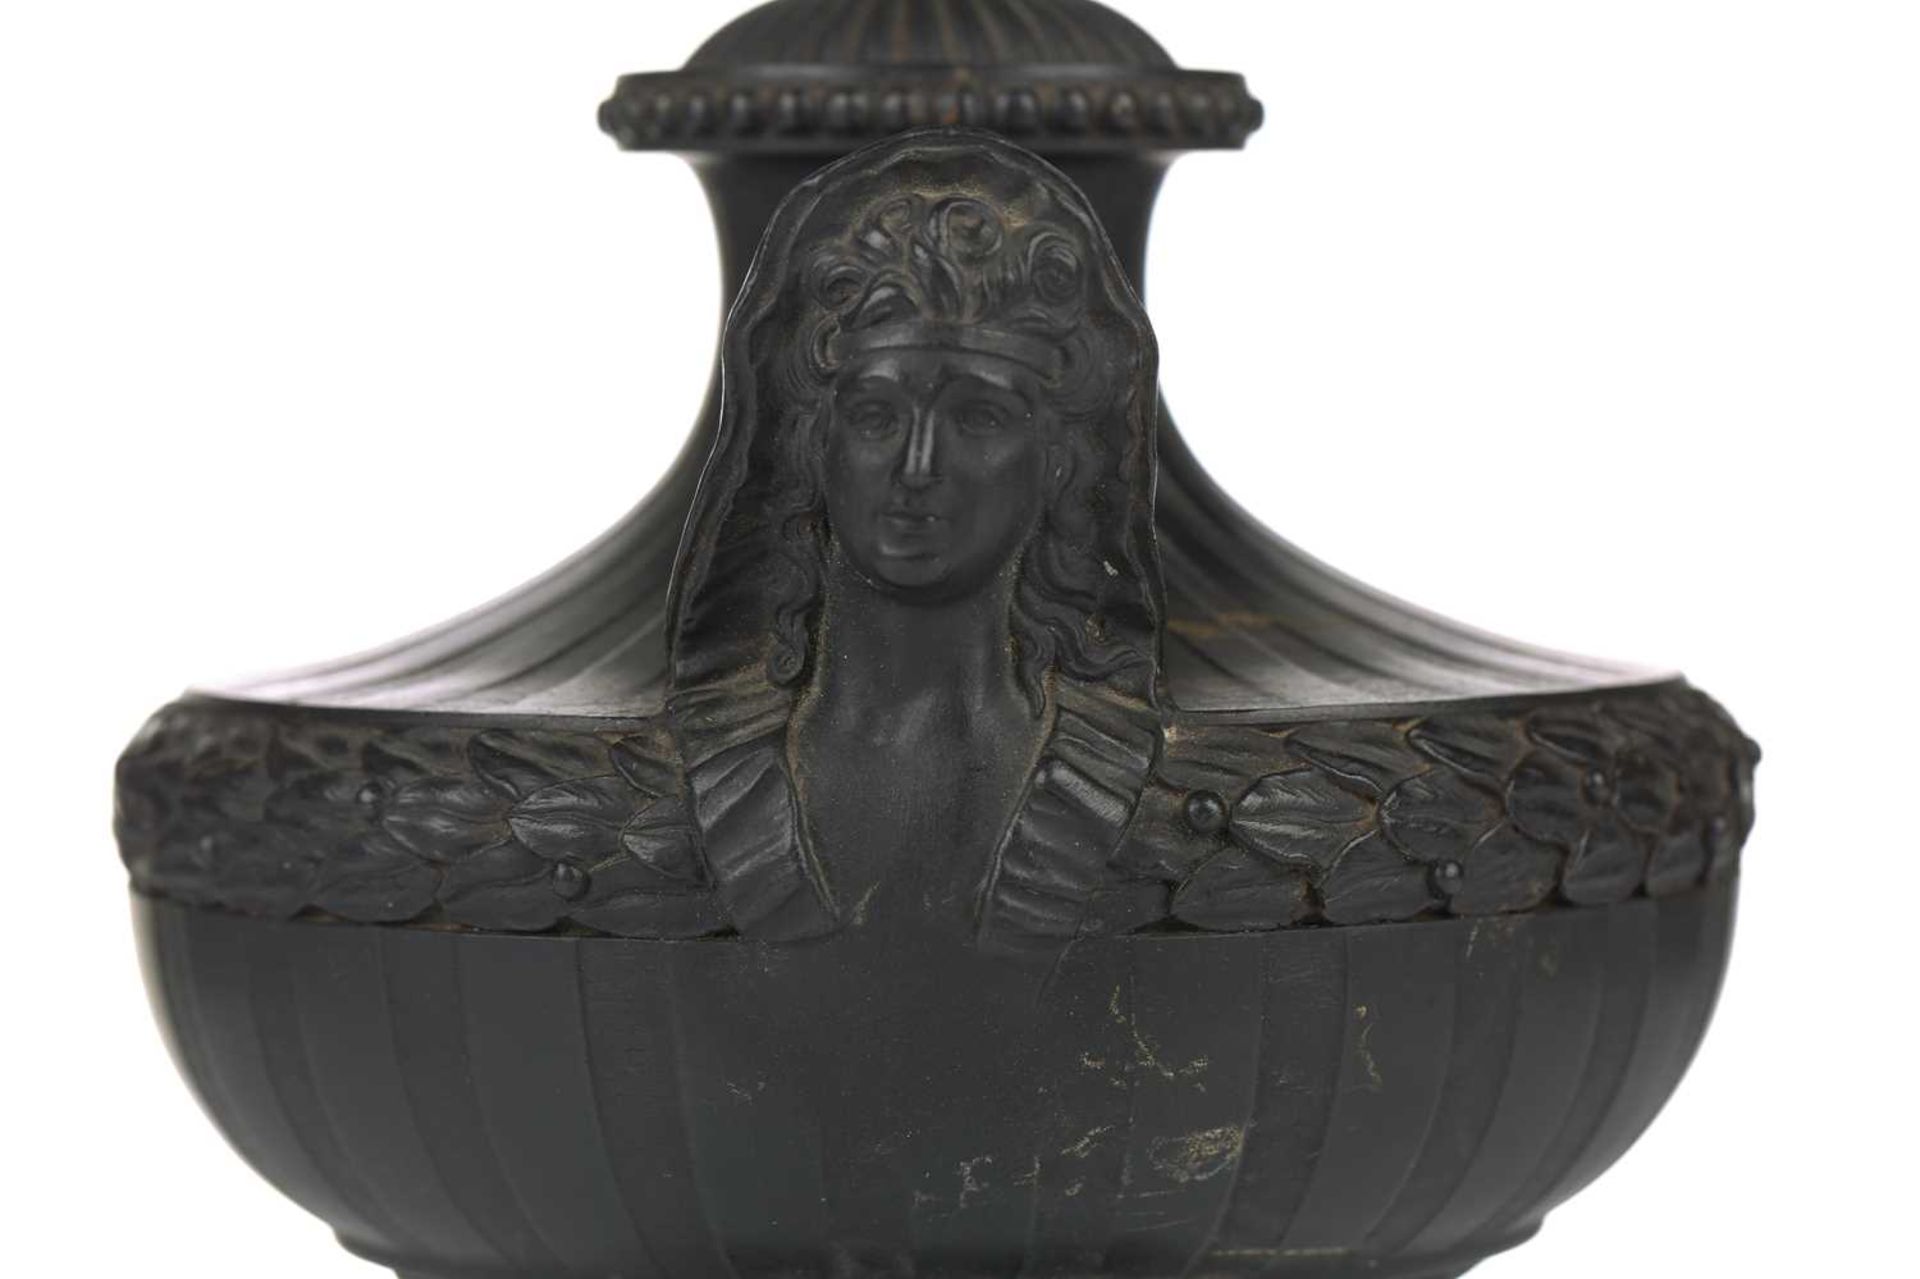 Wedgwood & Bentley, Etruria: a late 18th century black basalt urn and cover, of Classical form - Image 8 of 15